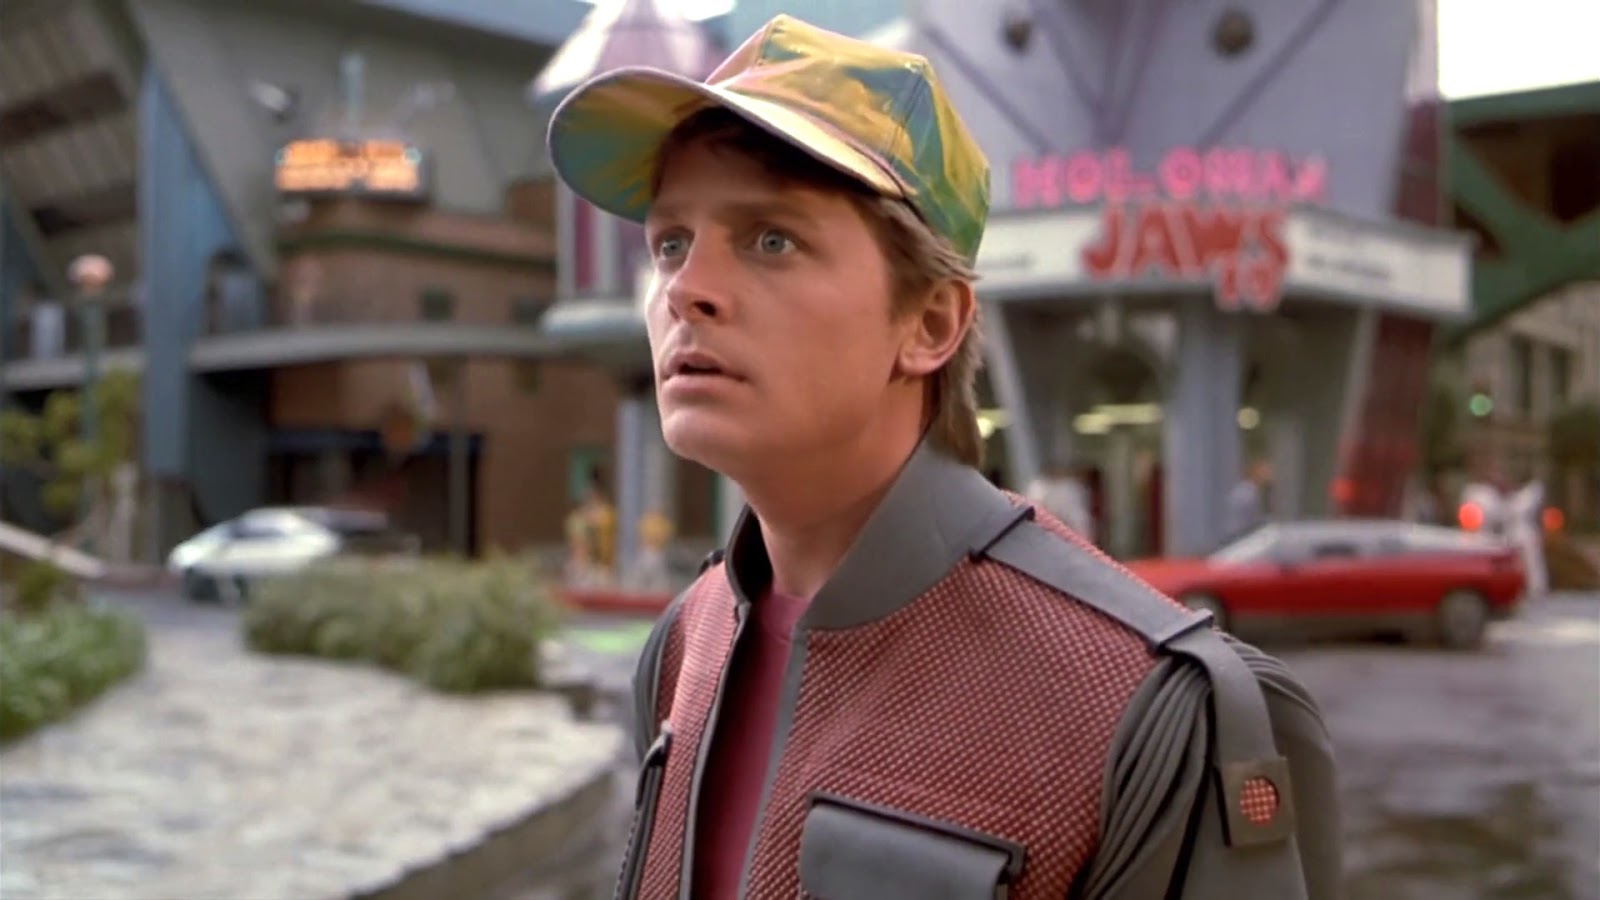 Today's Article - Marty McFly - Quizmaster Trivia: Drink While You Think...